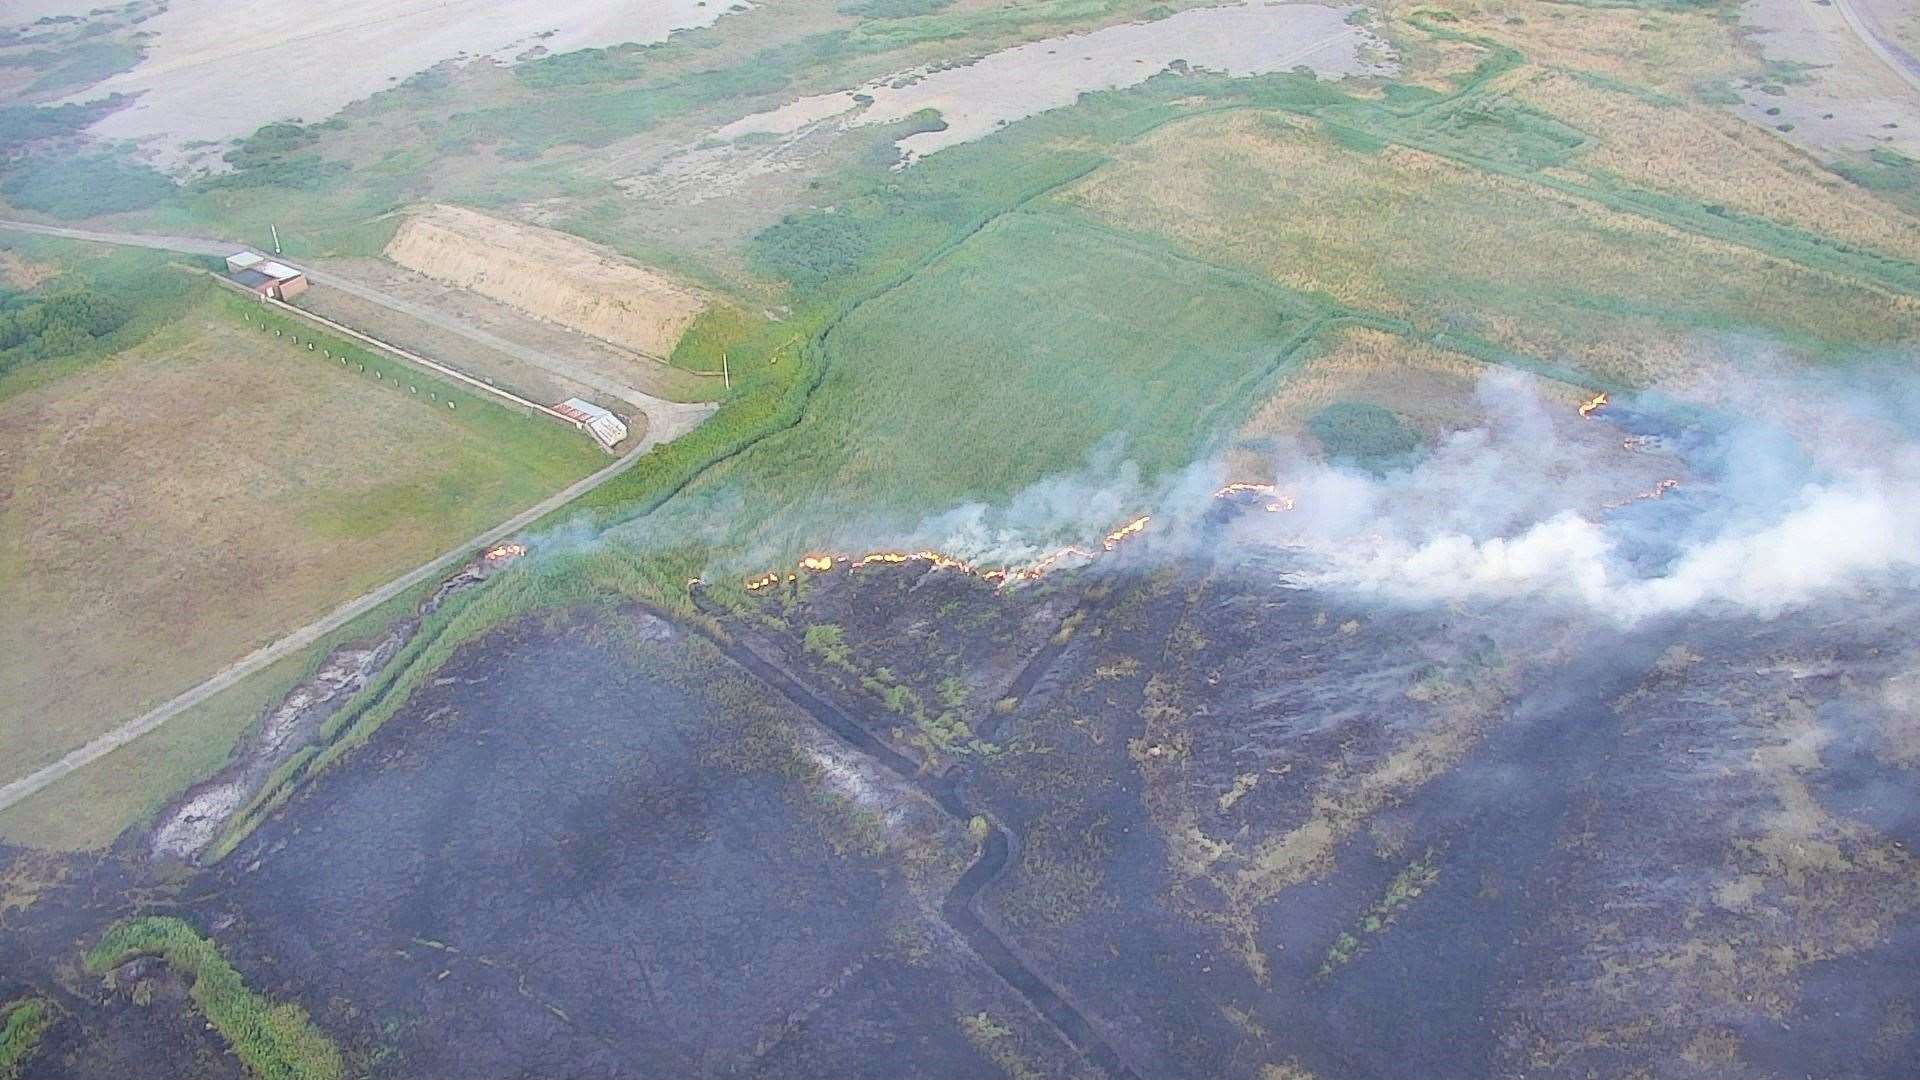 Dramatic images from a KFRS drone above the Lydd Ranges show the scale of the undergrowth fire. At its height over 100 firefighters worked in very challenging conditions to tackle the blaze